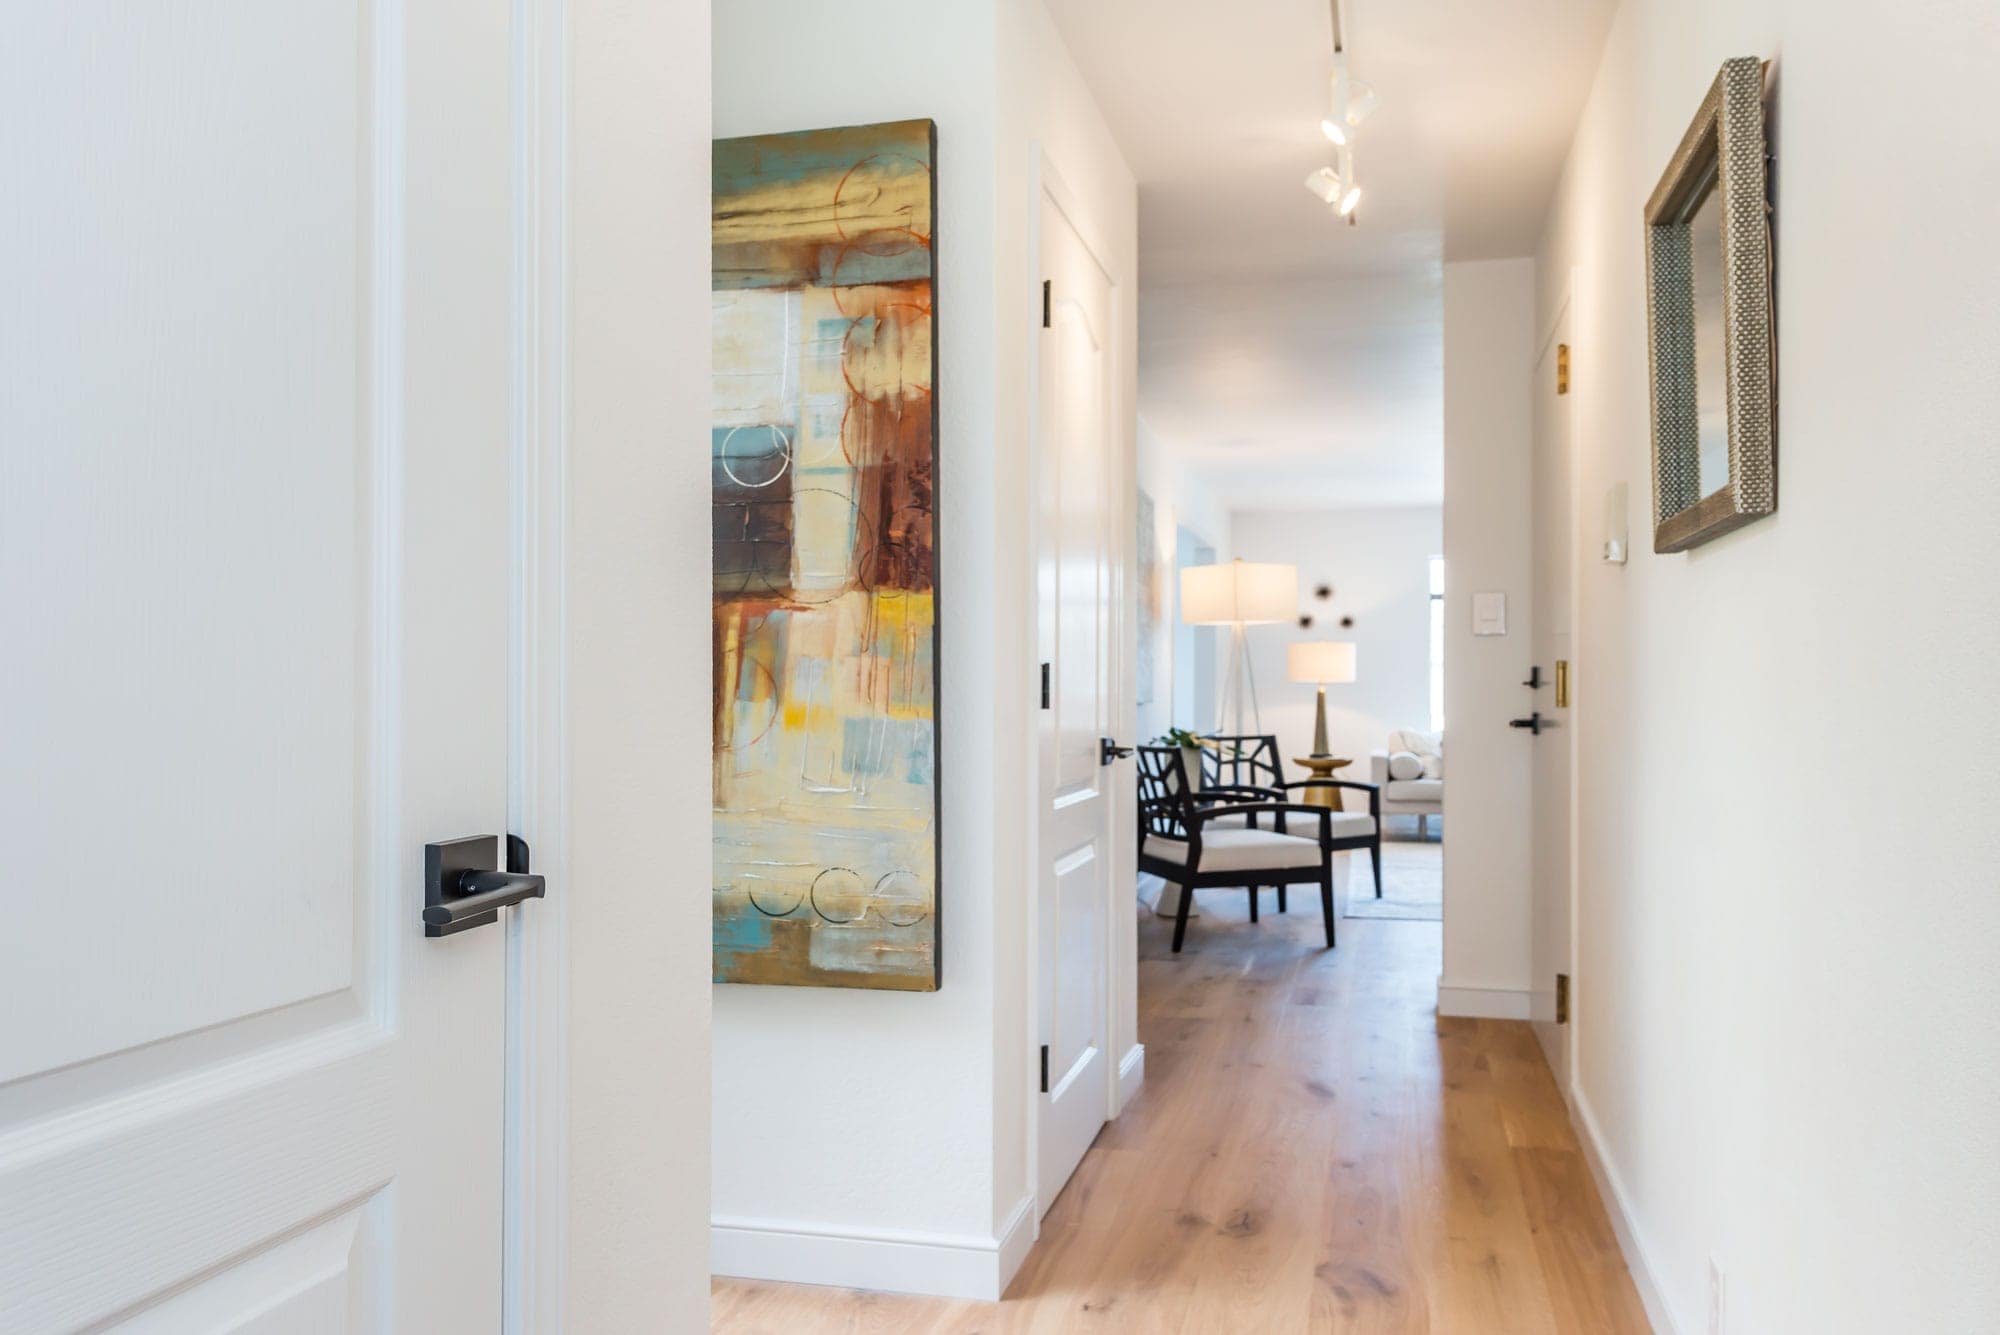 375 15th Avenue's updated hallway has two closets, new track lighting, those quiet hardwood floors we told you about and access to its deeded private center patio.